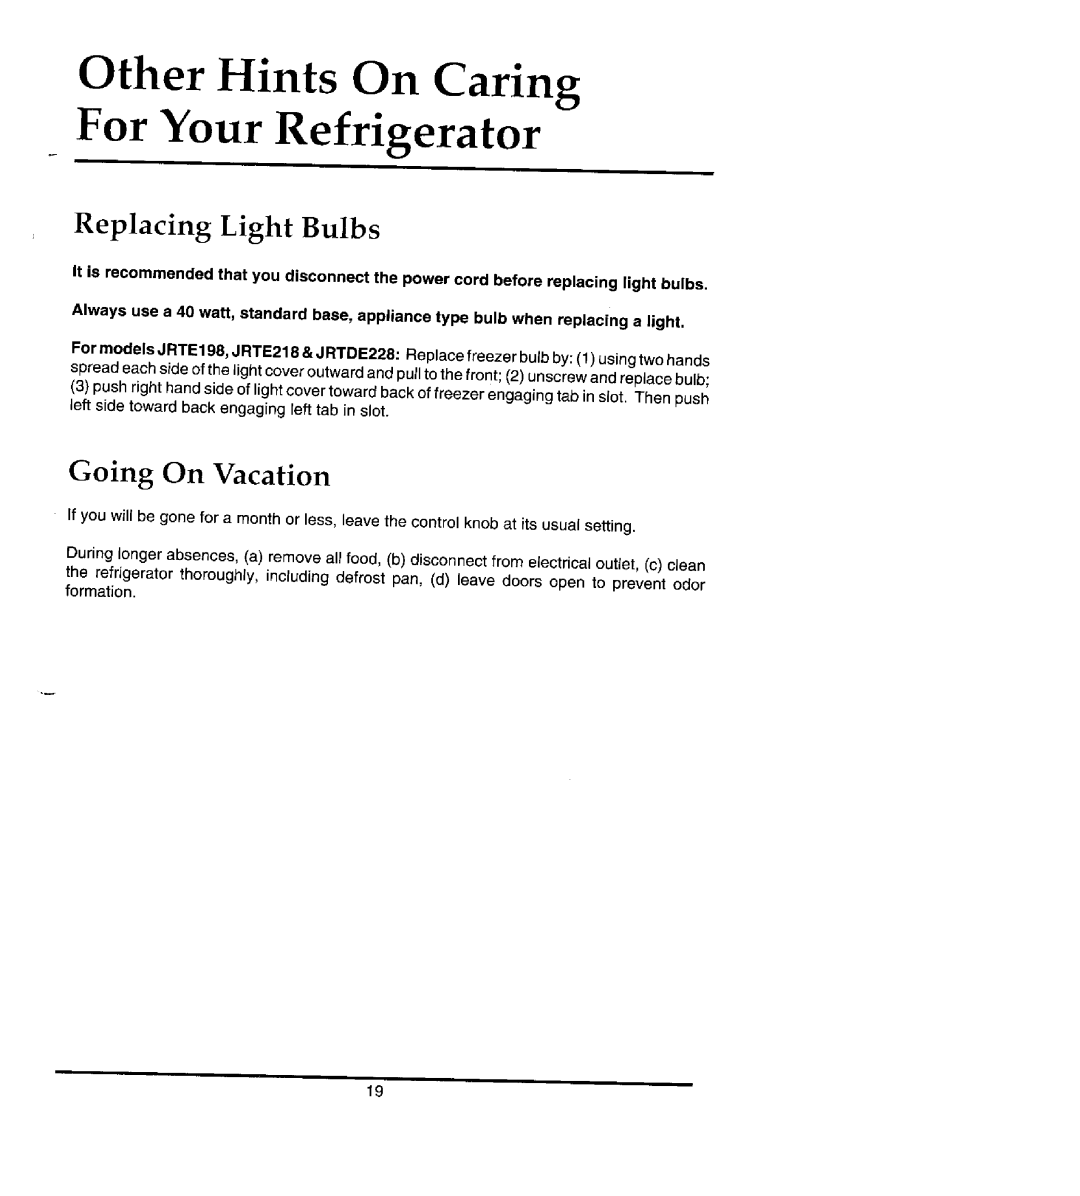 Jenn-Air JRTDE228 manual Other Hints On Caring For Your Refrigerator, Replacing Light Bulbs, Going On Vacation 